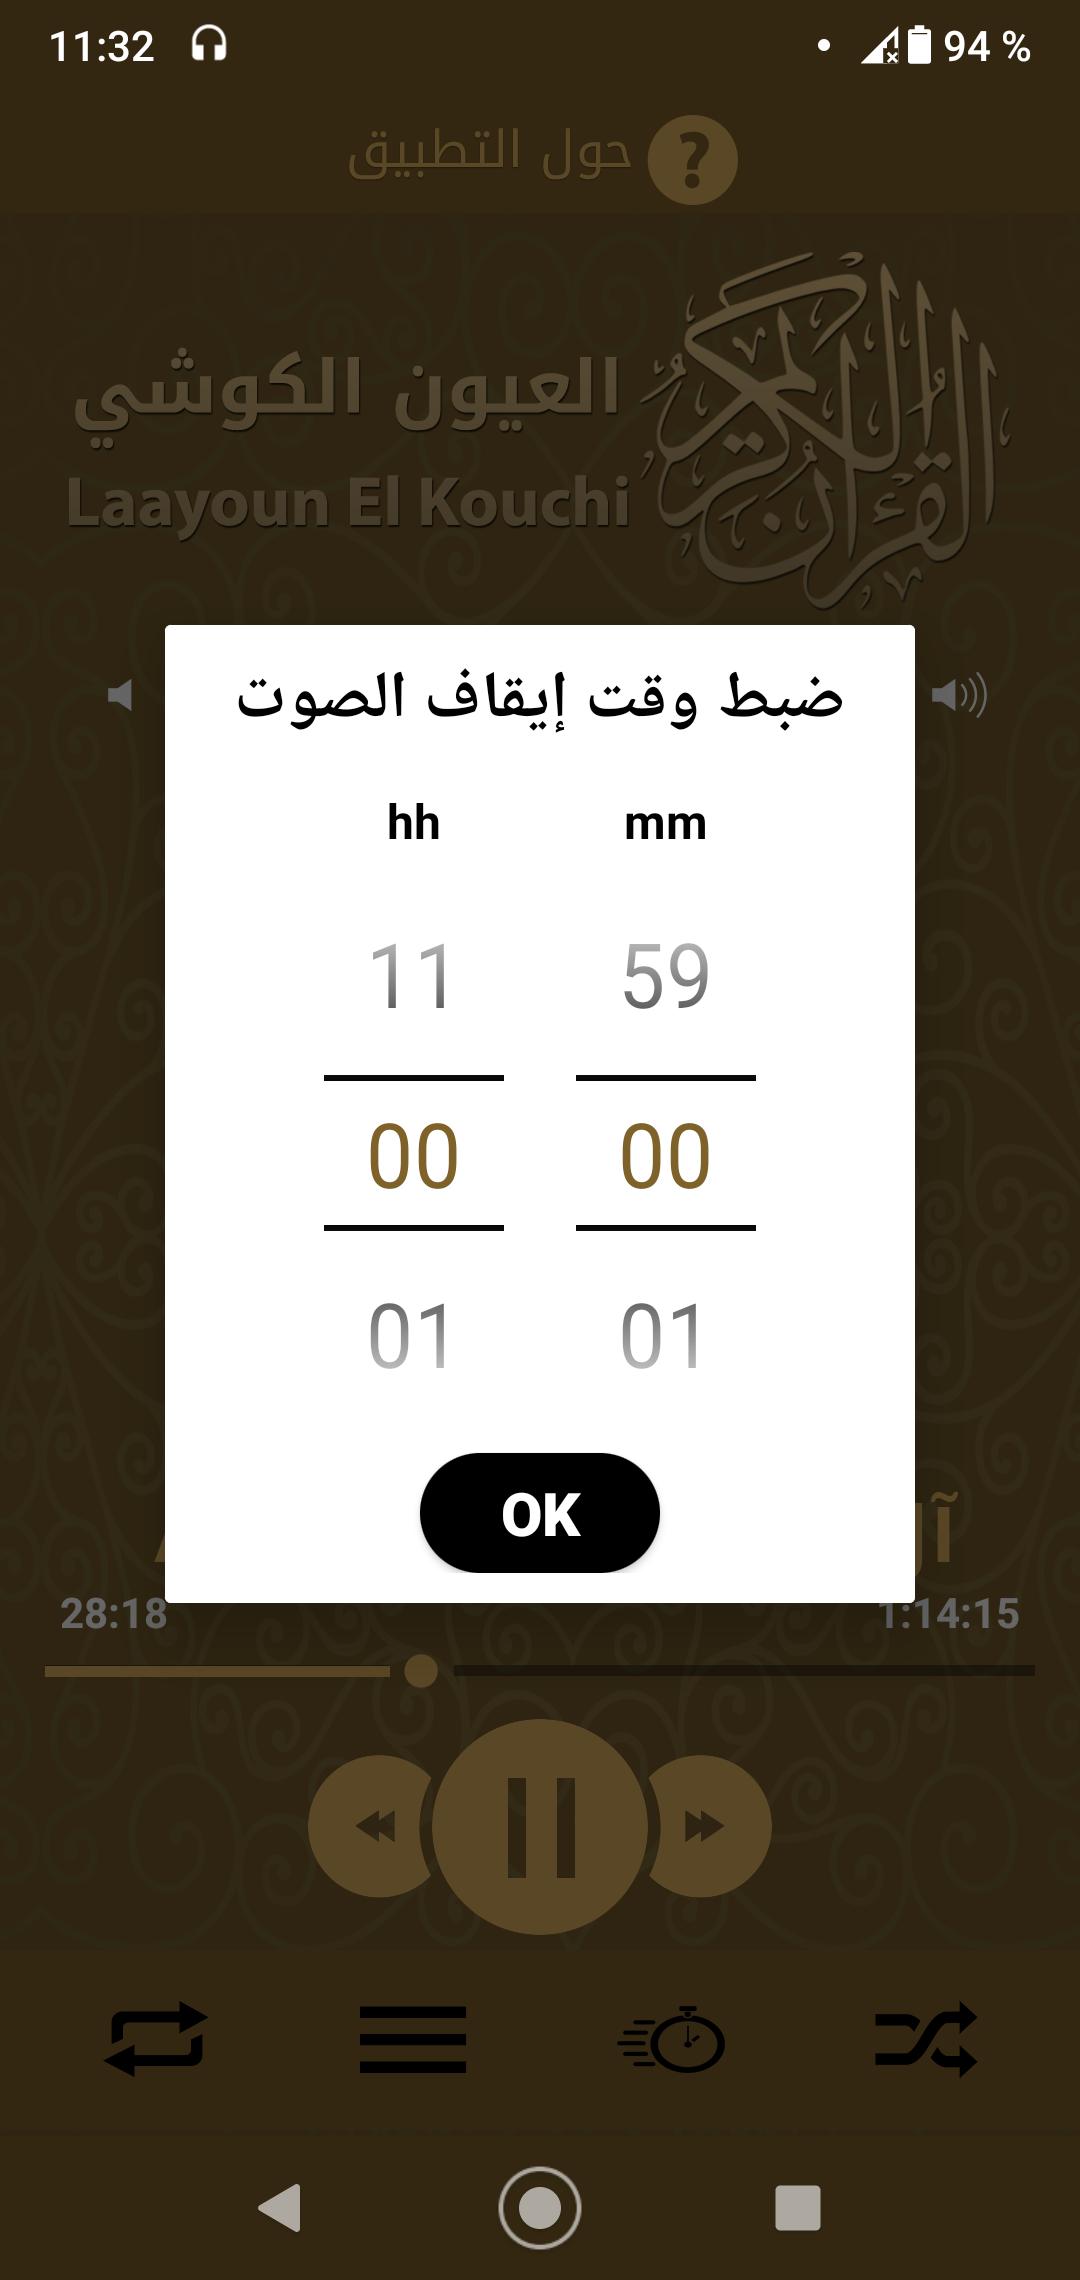 Quran mp3 By Laayoun El Kouchi Holy Quran warch for Android - APK Download